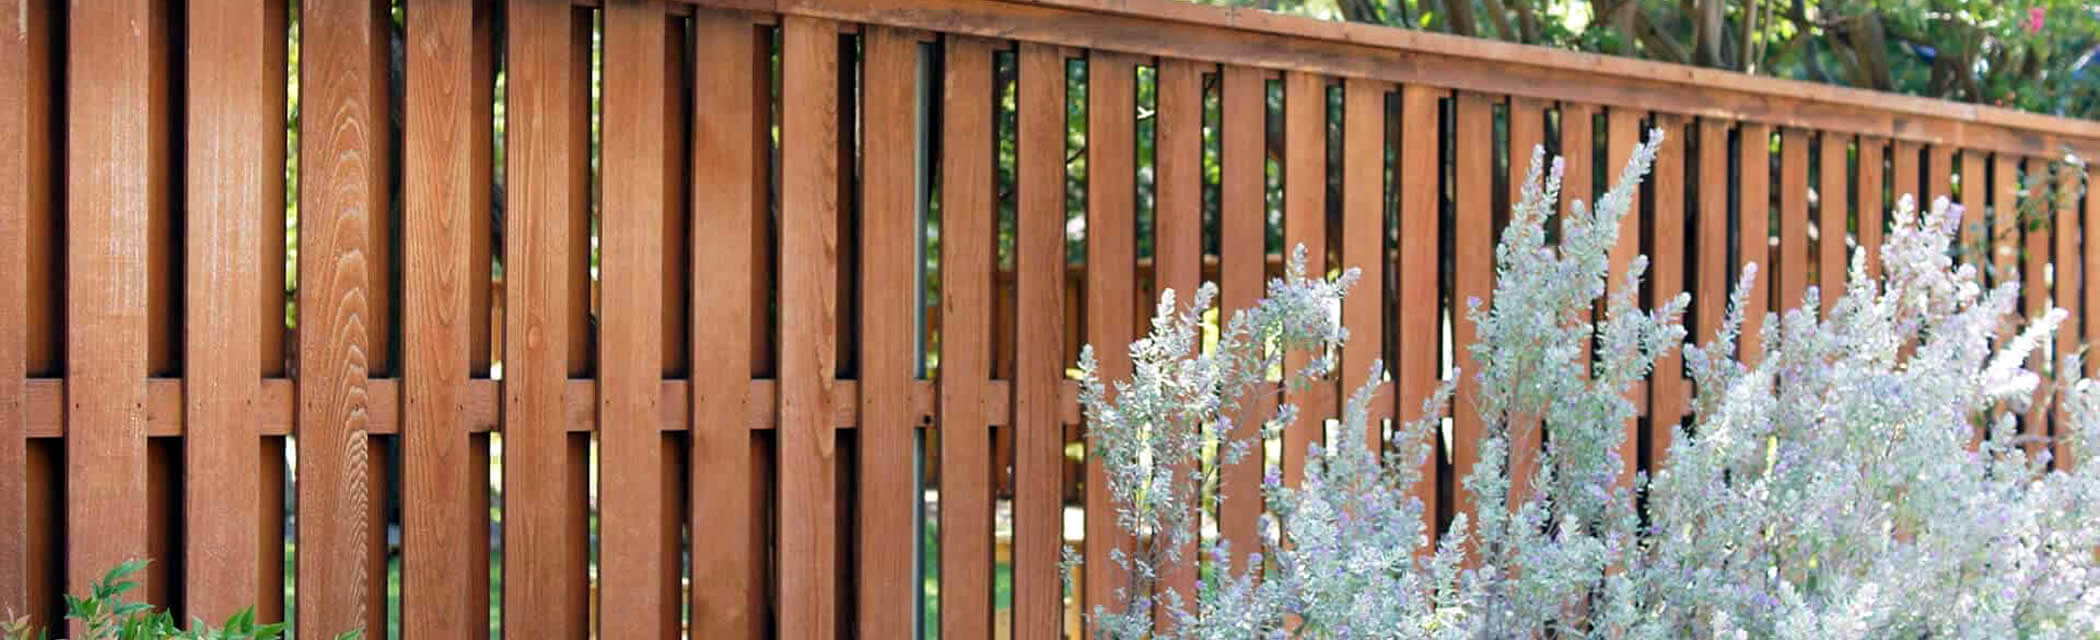 Professional Fence Cleaning in Wake Forest & Raleigh NC